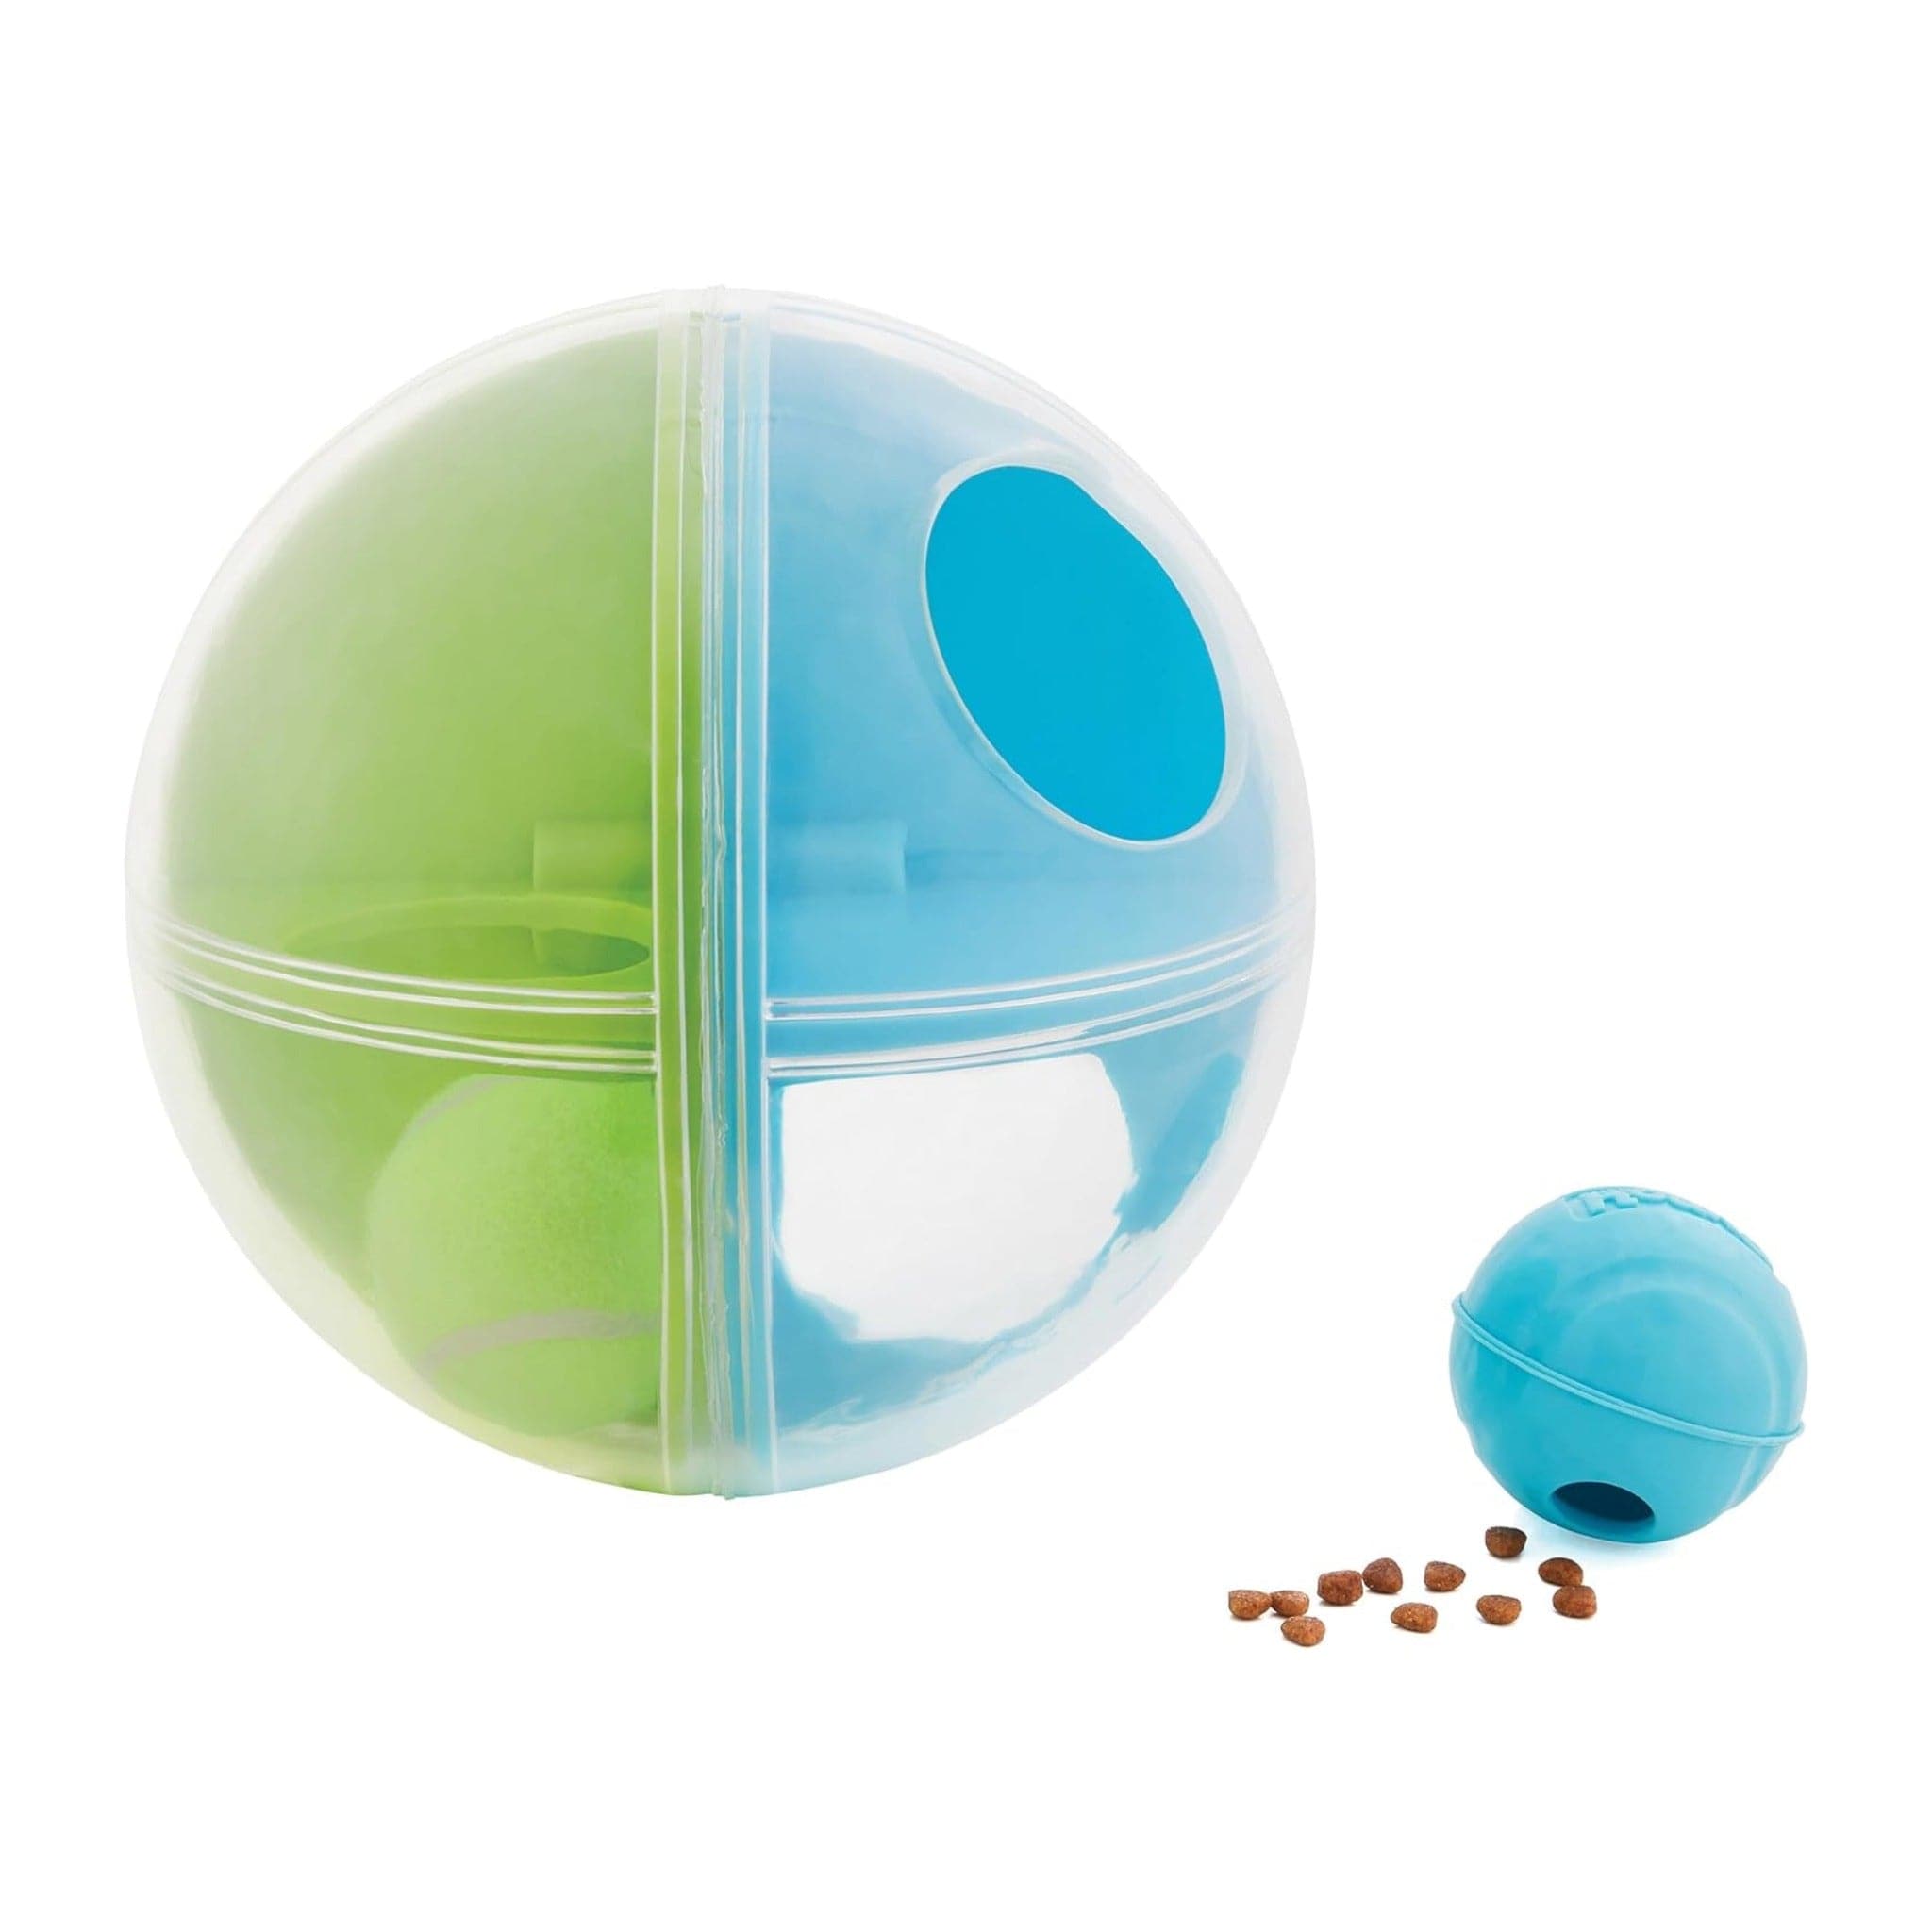 Maze Treat Dispensing Dog Toy Brain and Exercise Game for Dogs